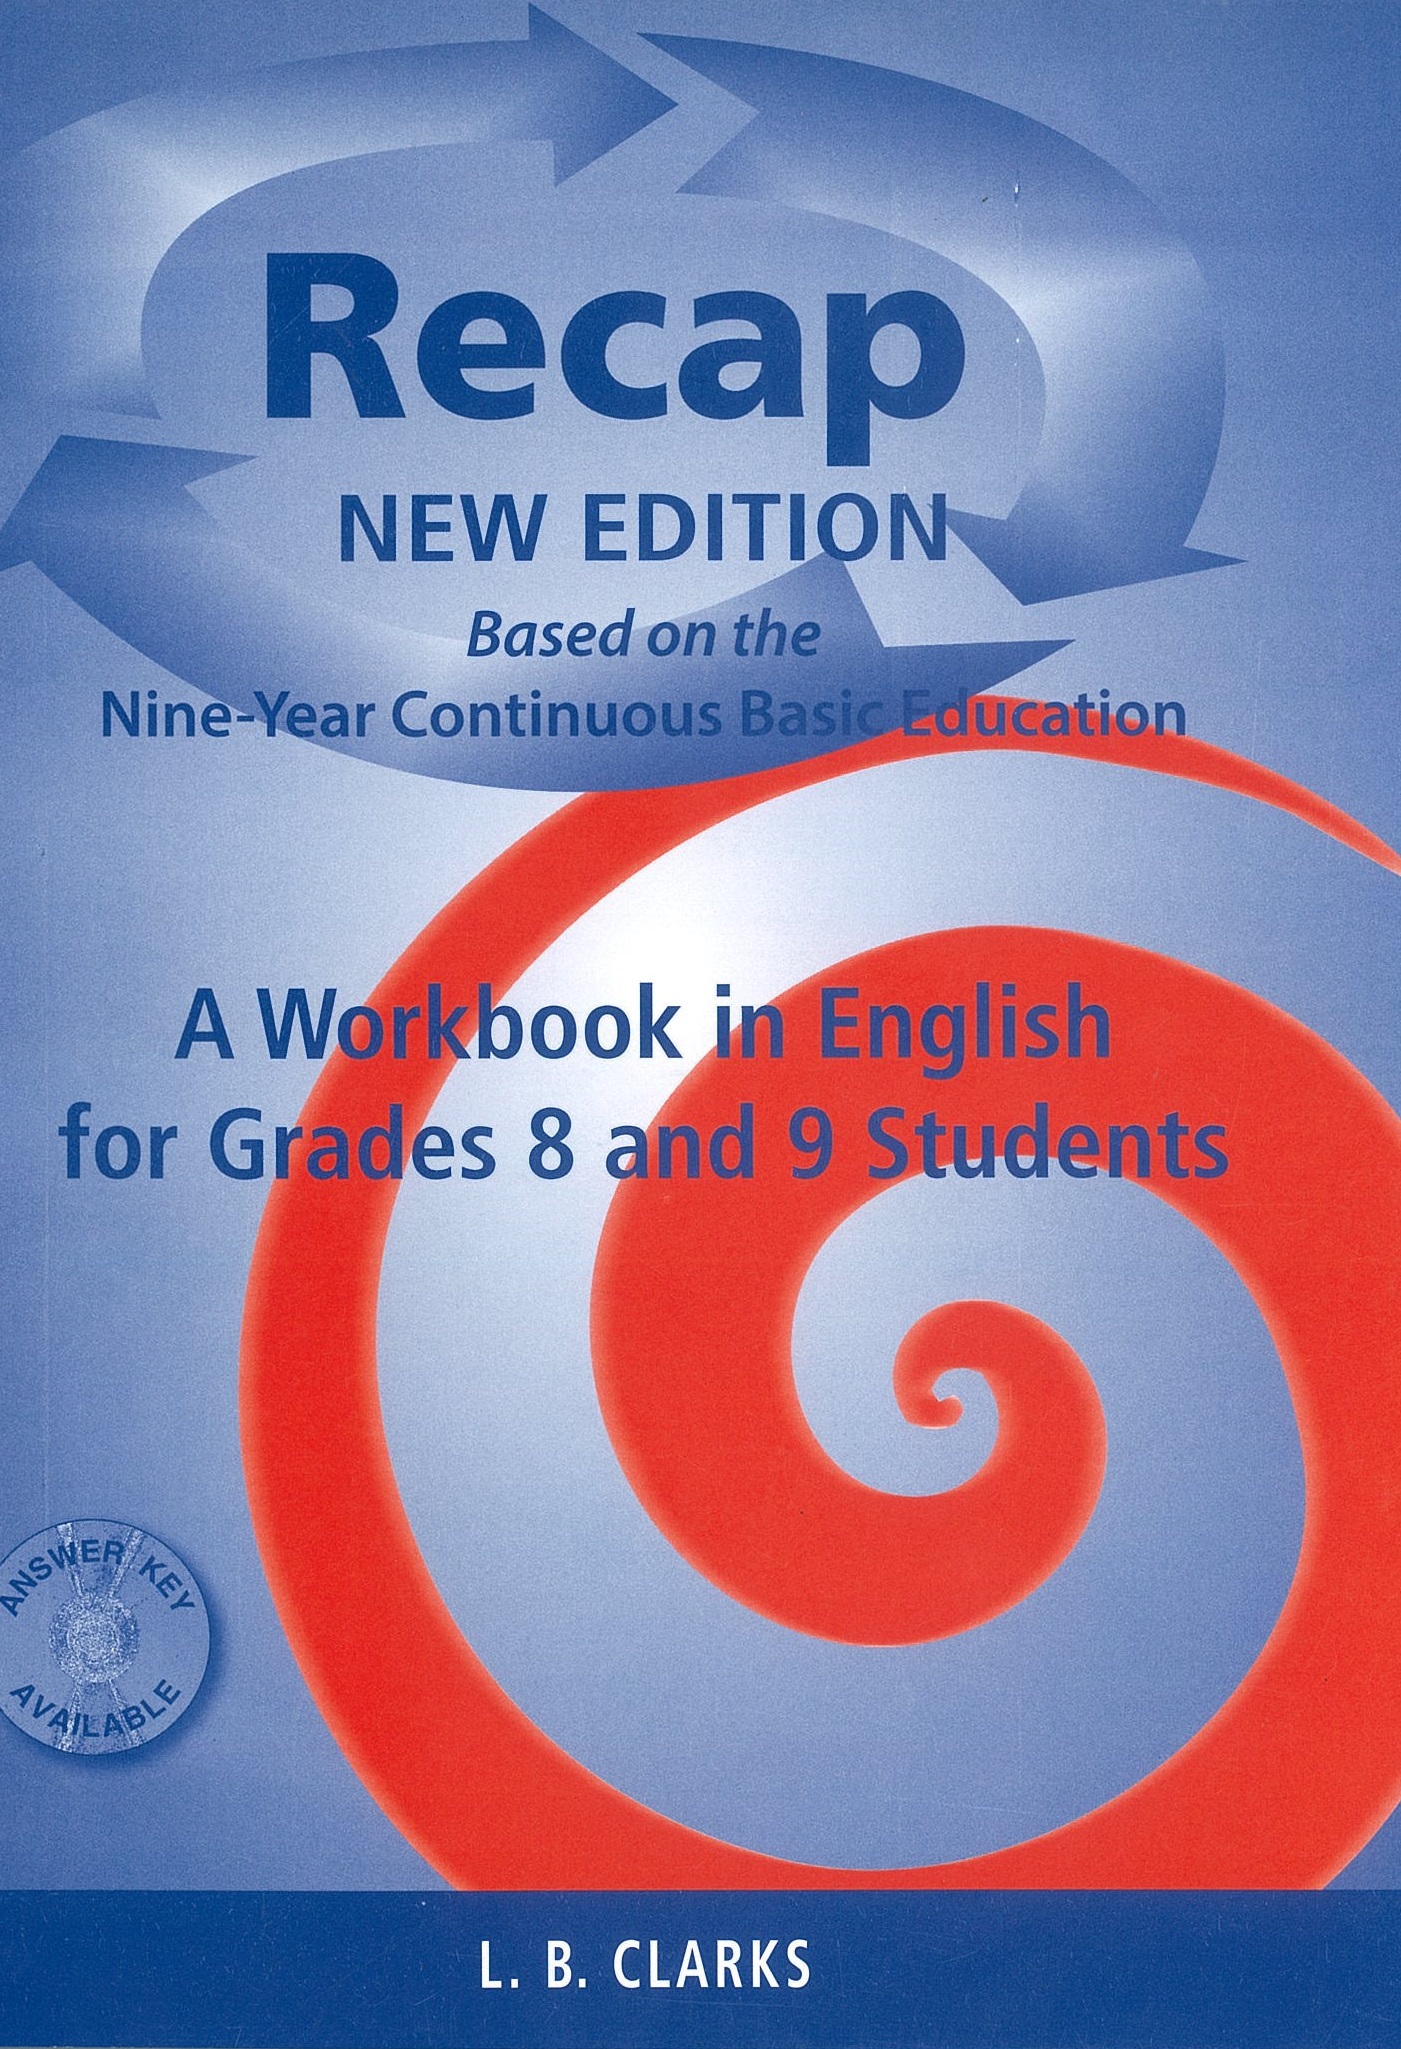 RECAP A WORKBOOK IN ENGLISH FOR GRADE 8 AND GRADE 9